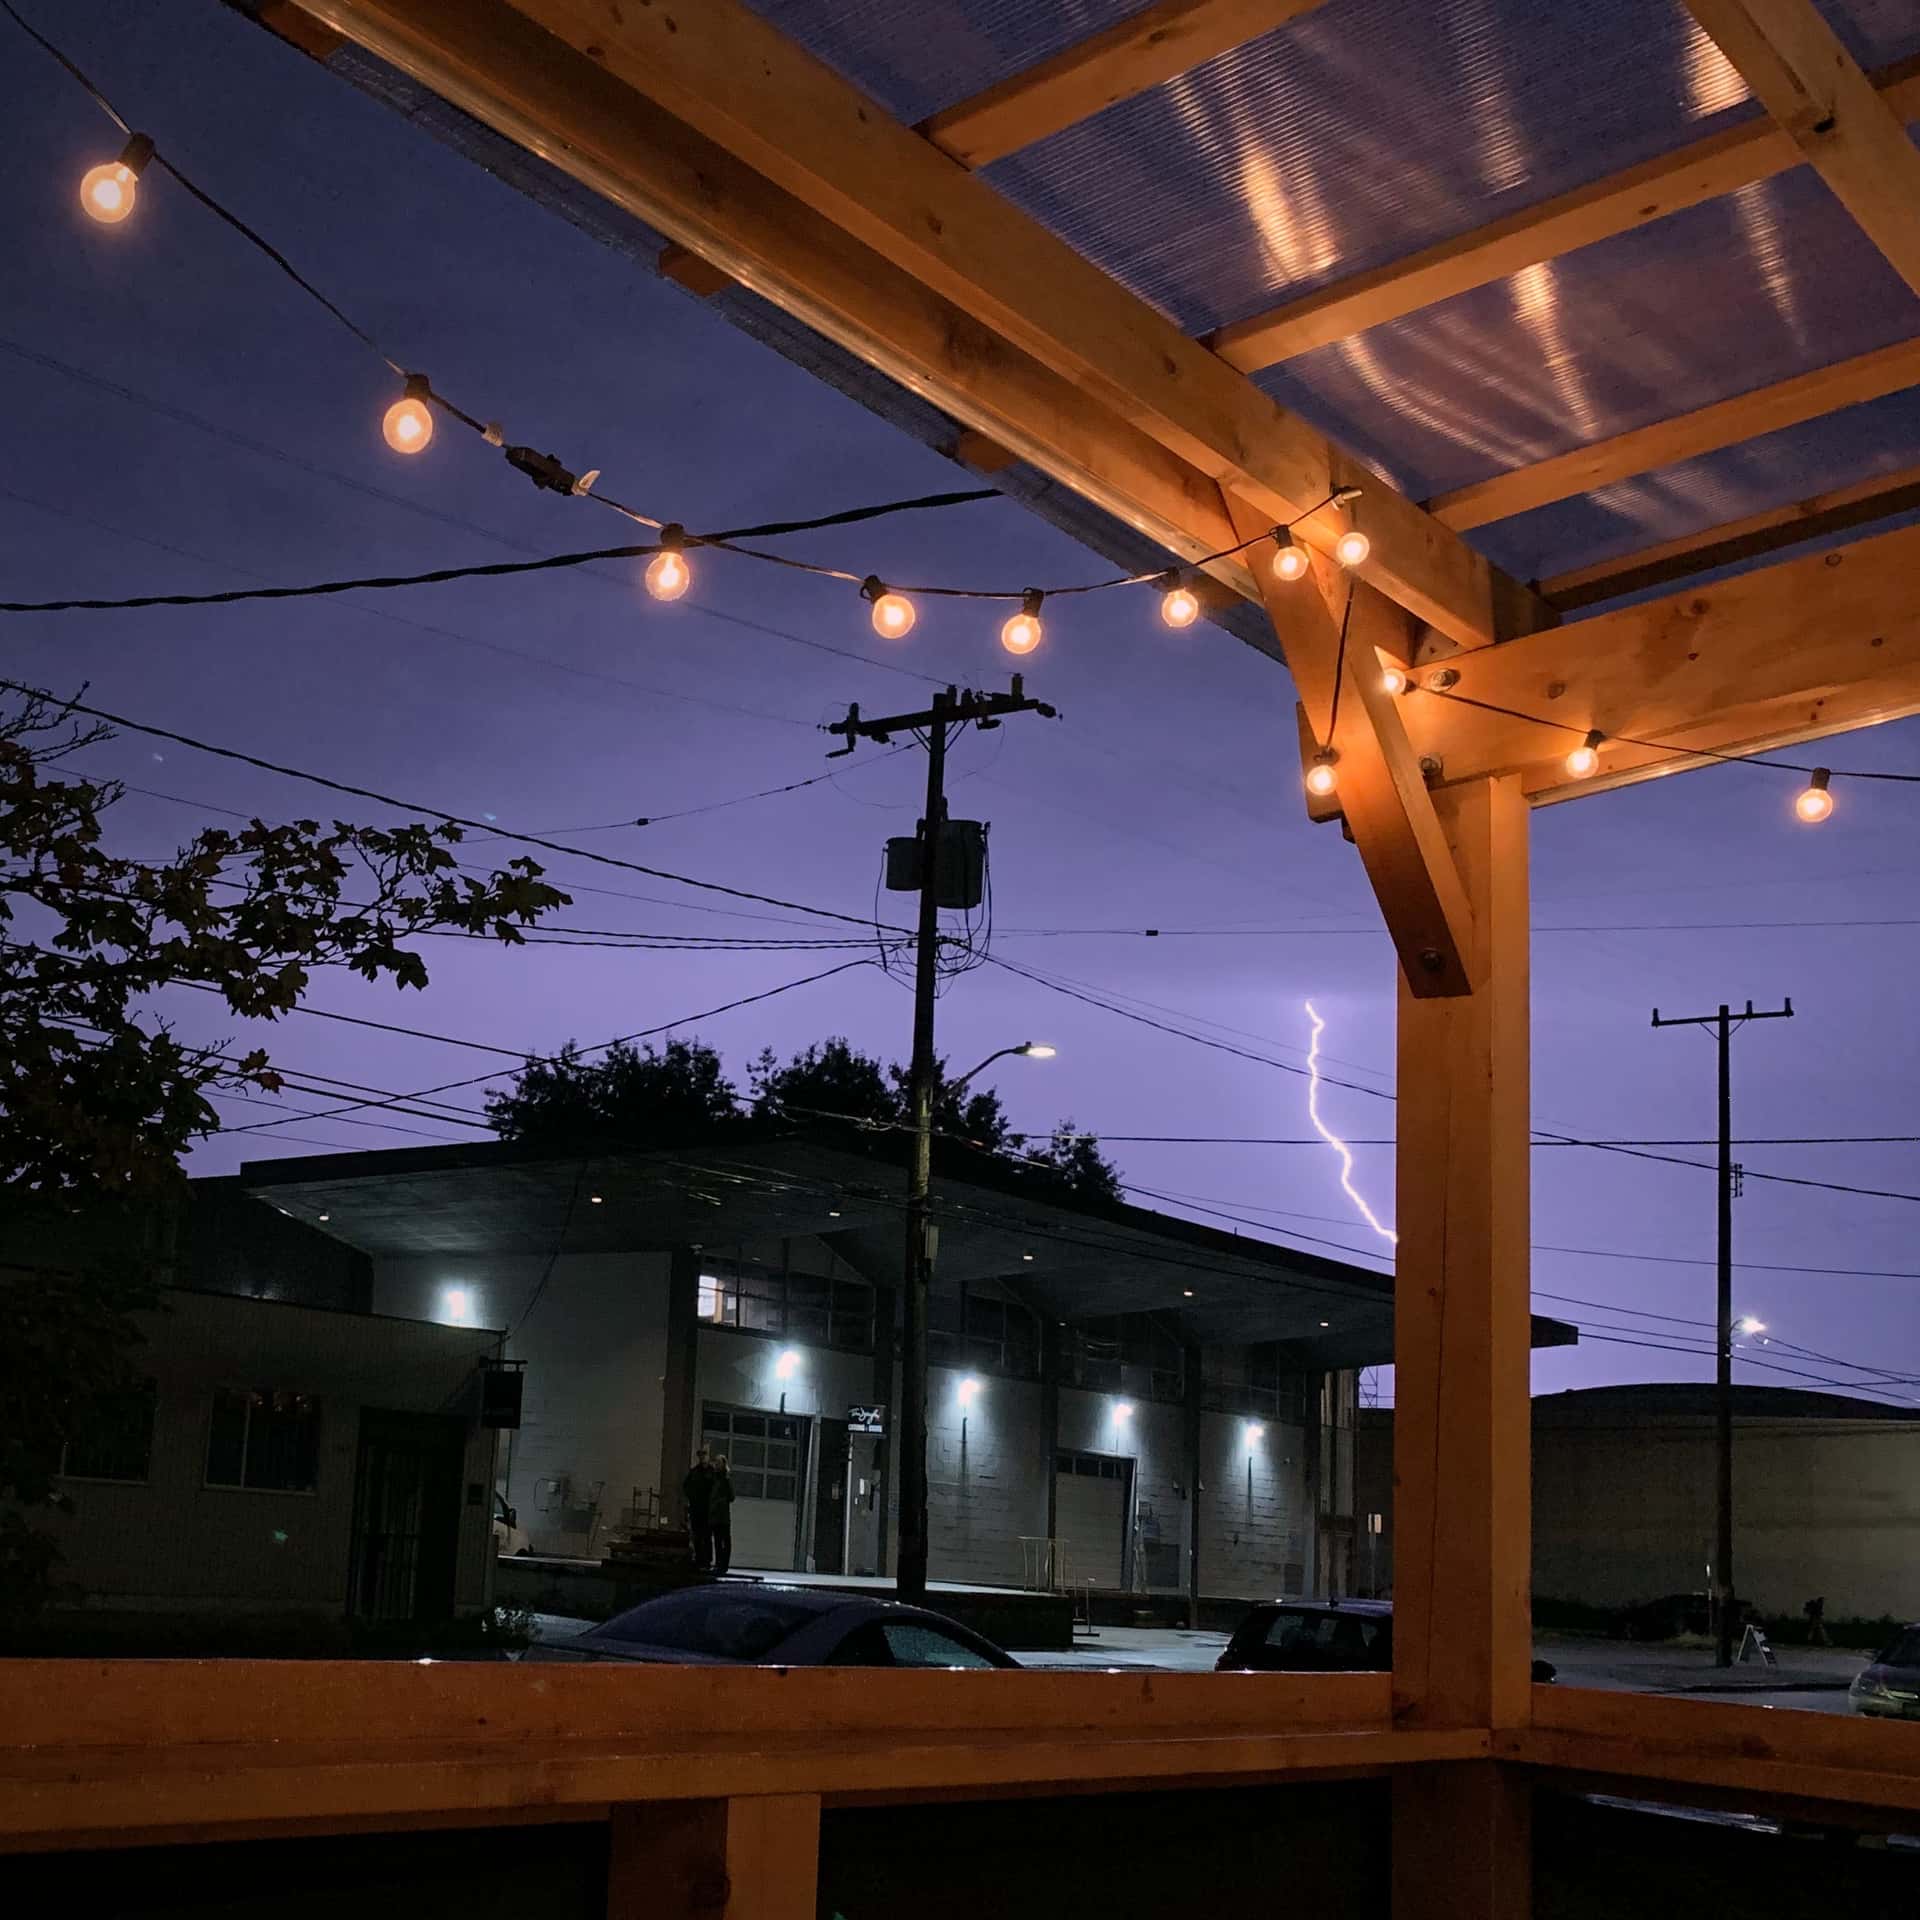 lightning strike seen from Obec Brewing’s covered patio